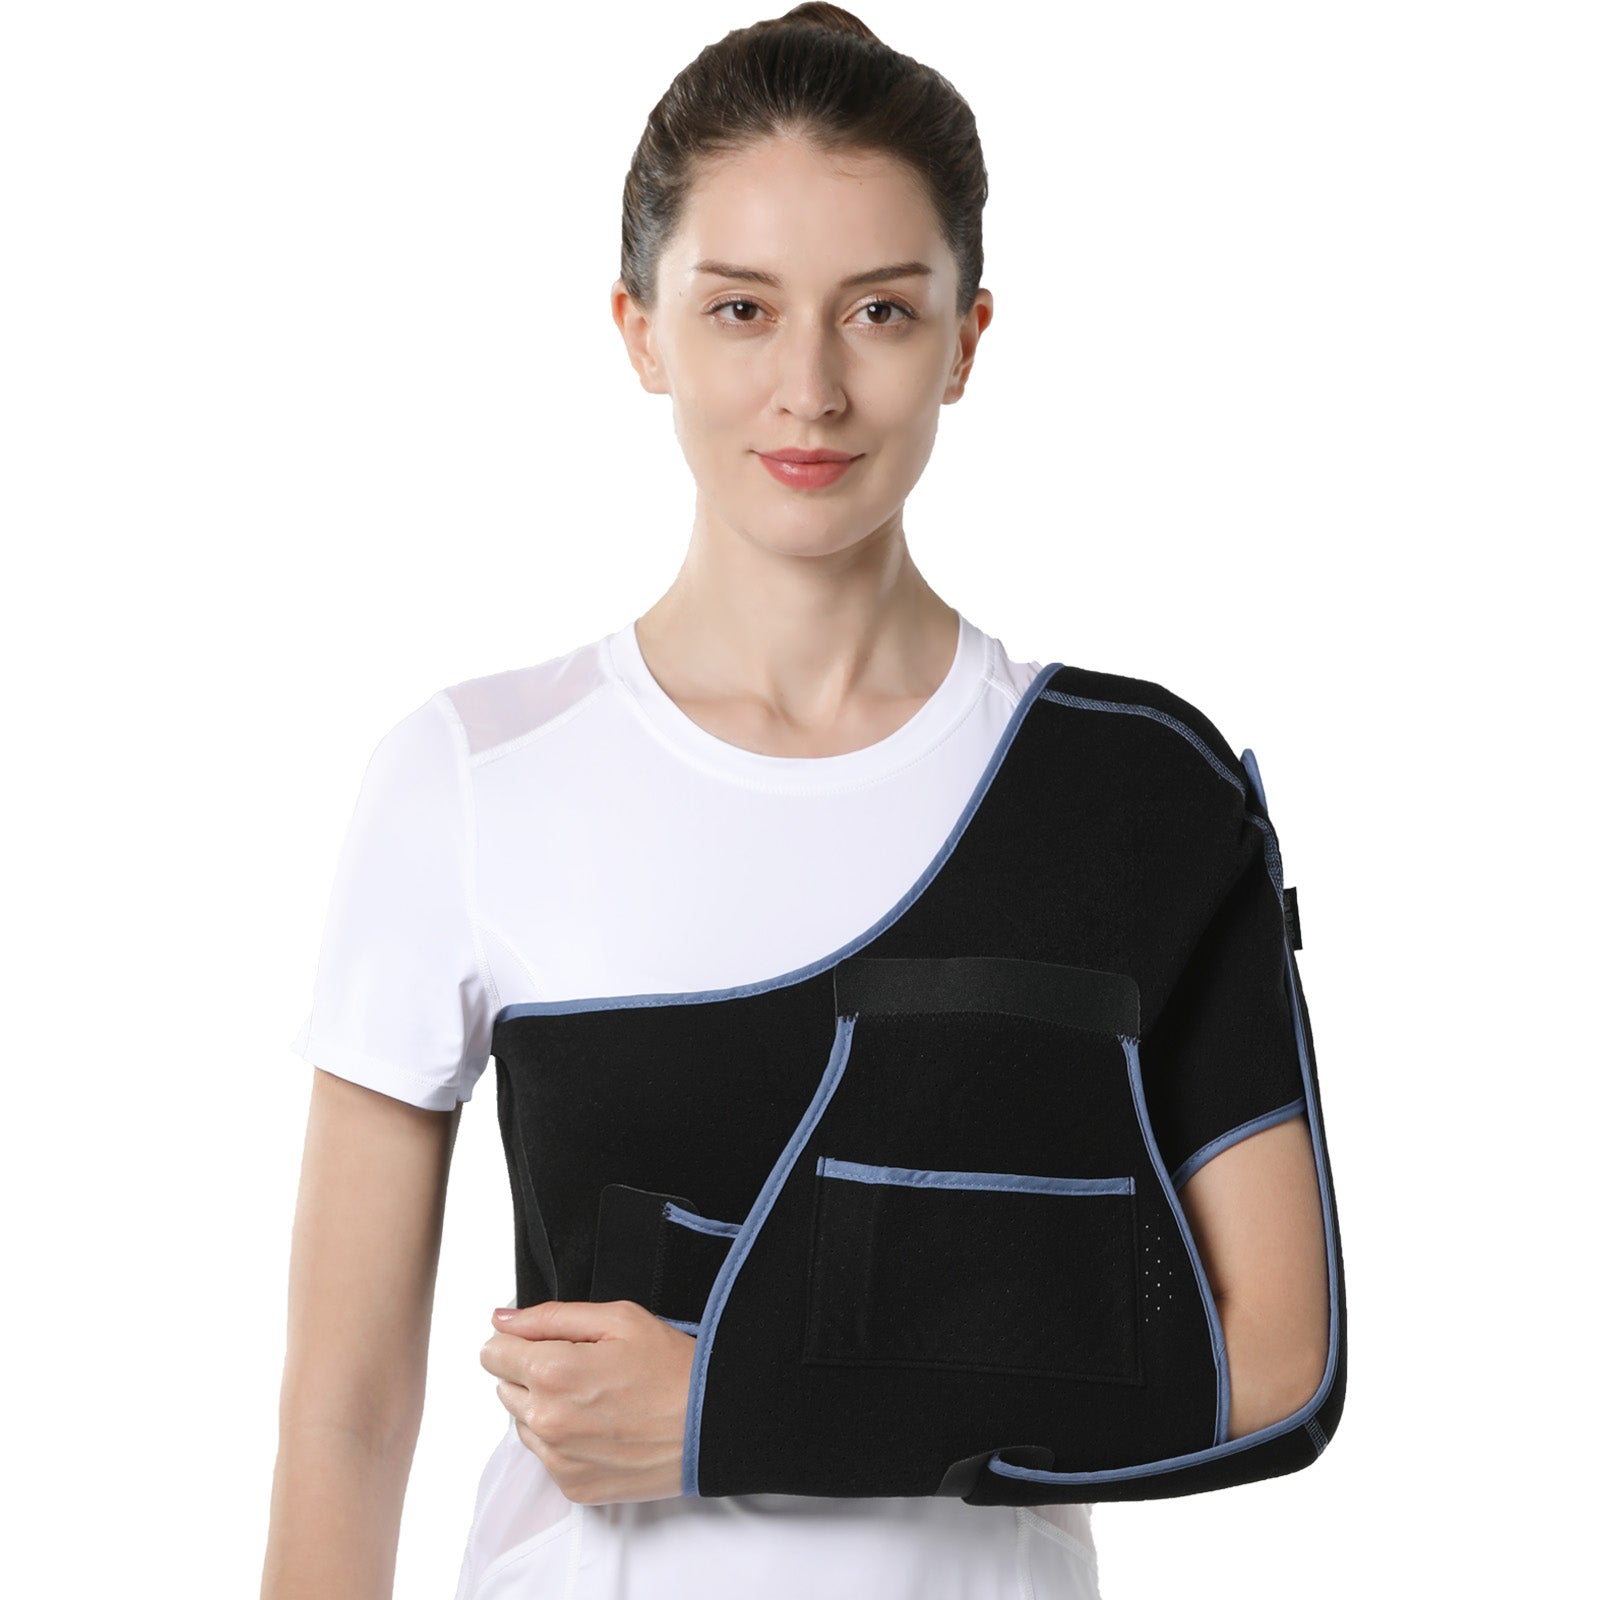 VELPEAU Arm Sling Medical for Broken Hand, Fracture and